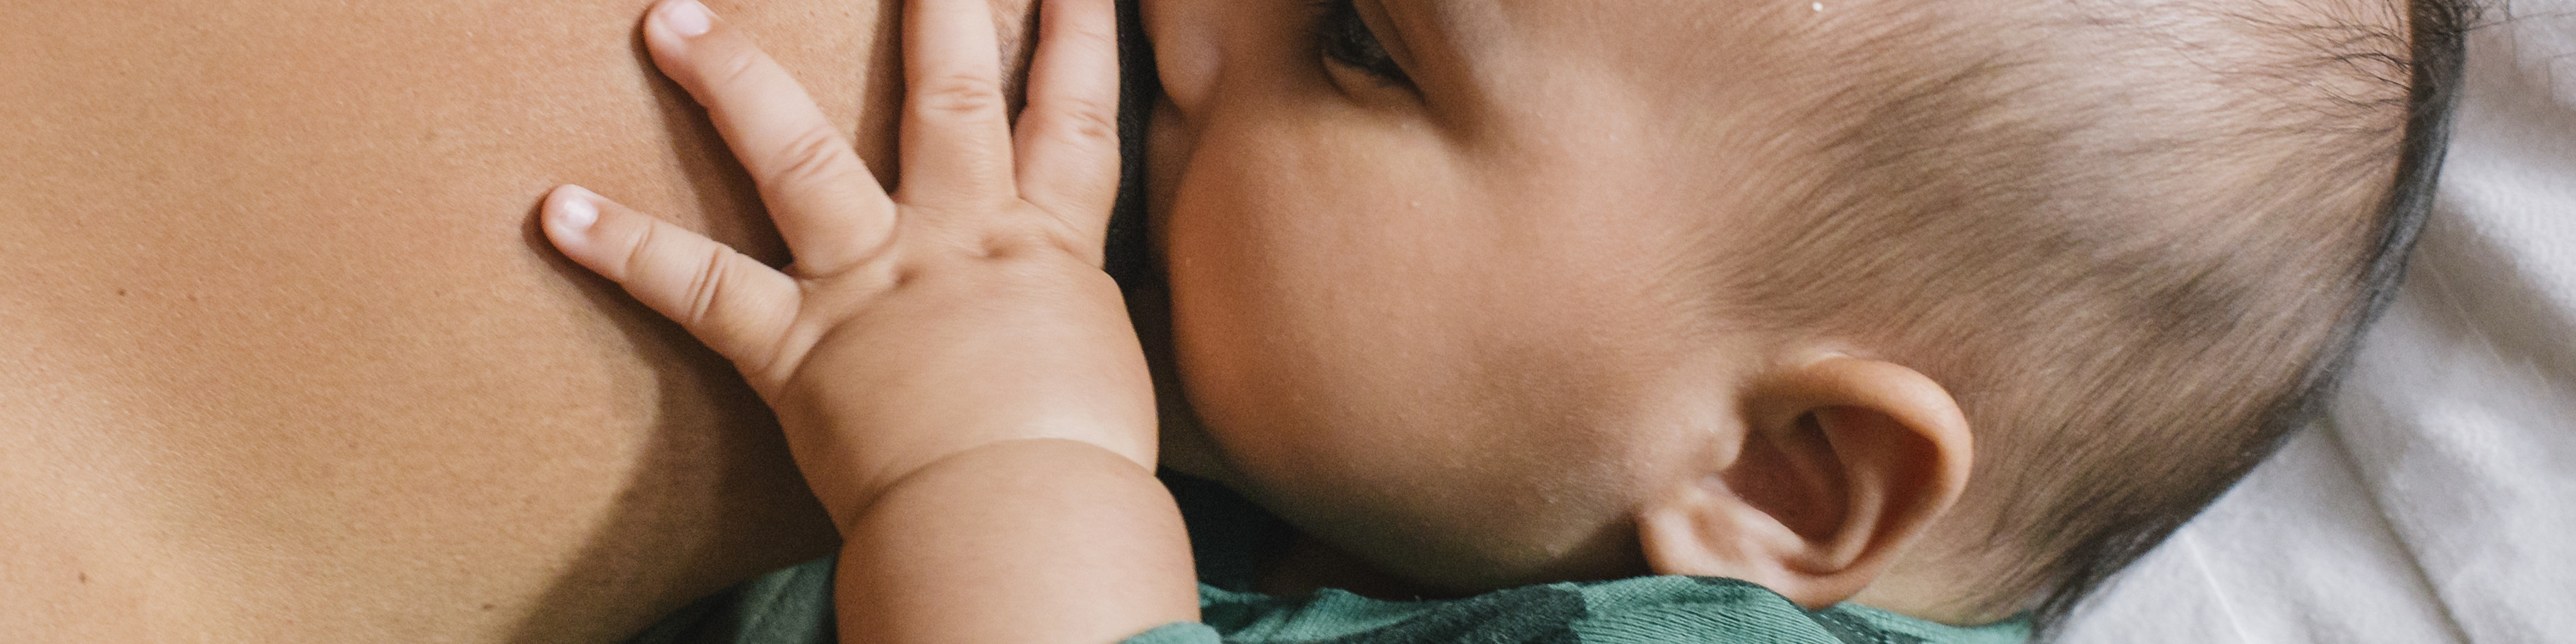 New to breastfeeding? No matter how you choose to feed your baby, these are positions that are recommended to support latching and prioritize comfort—including bottle-feeding and pumping.